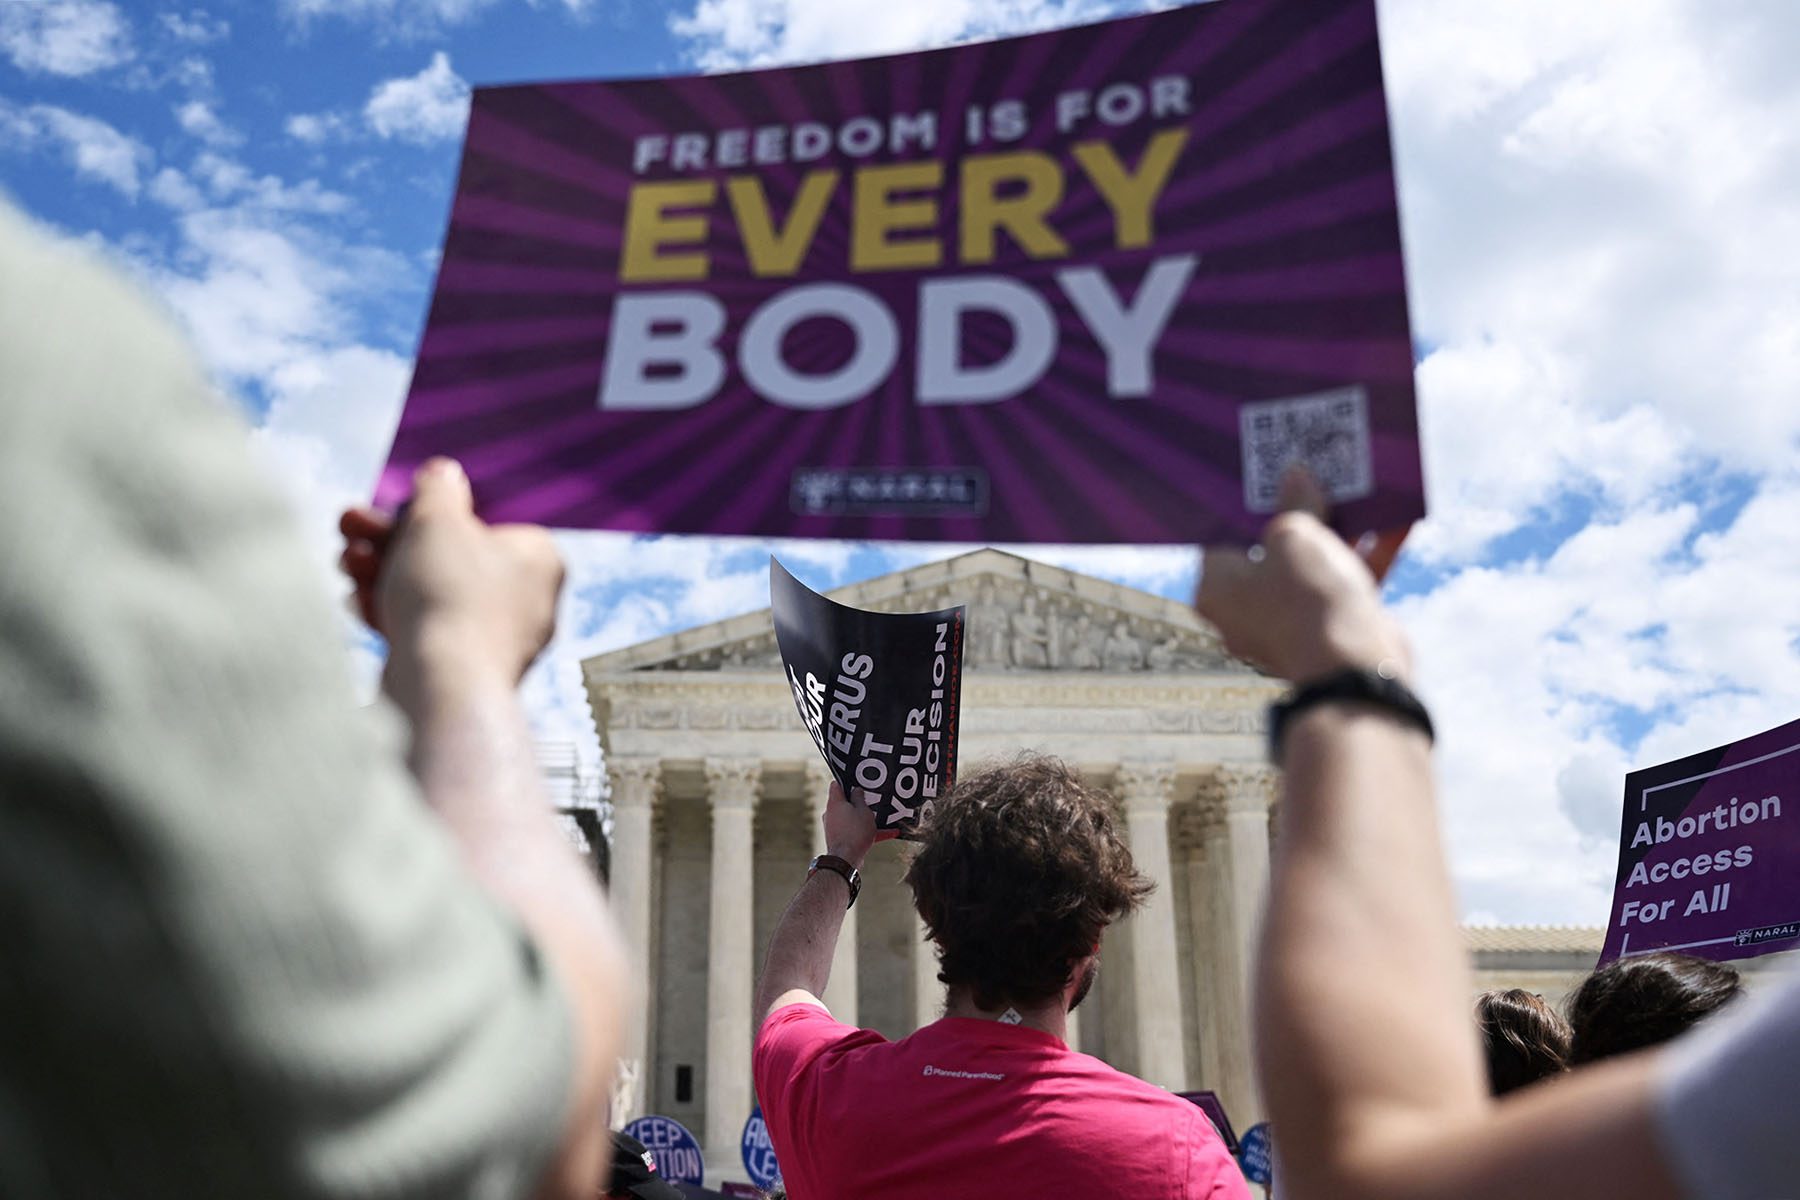 Demonstrators rally in support of abortion rights in front of the Supreme Court. A sign that reads "Freedom is for Everybody" can be seen in the foreground, and one that reads "abortion access for all" on the right side of the frame.